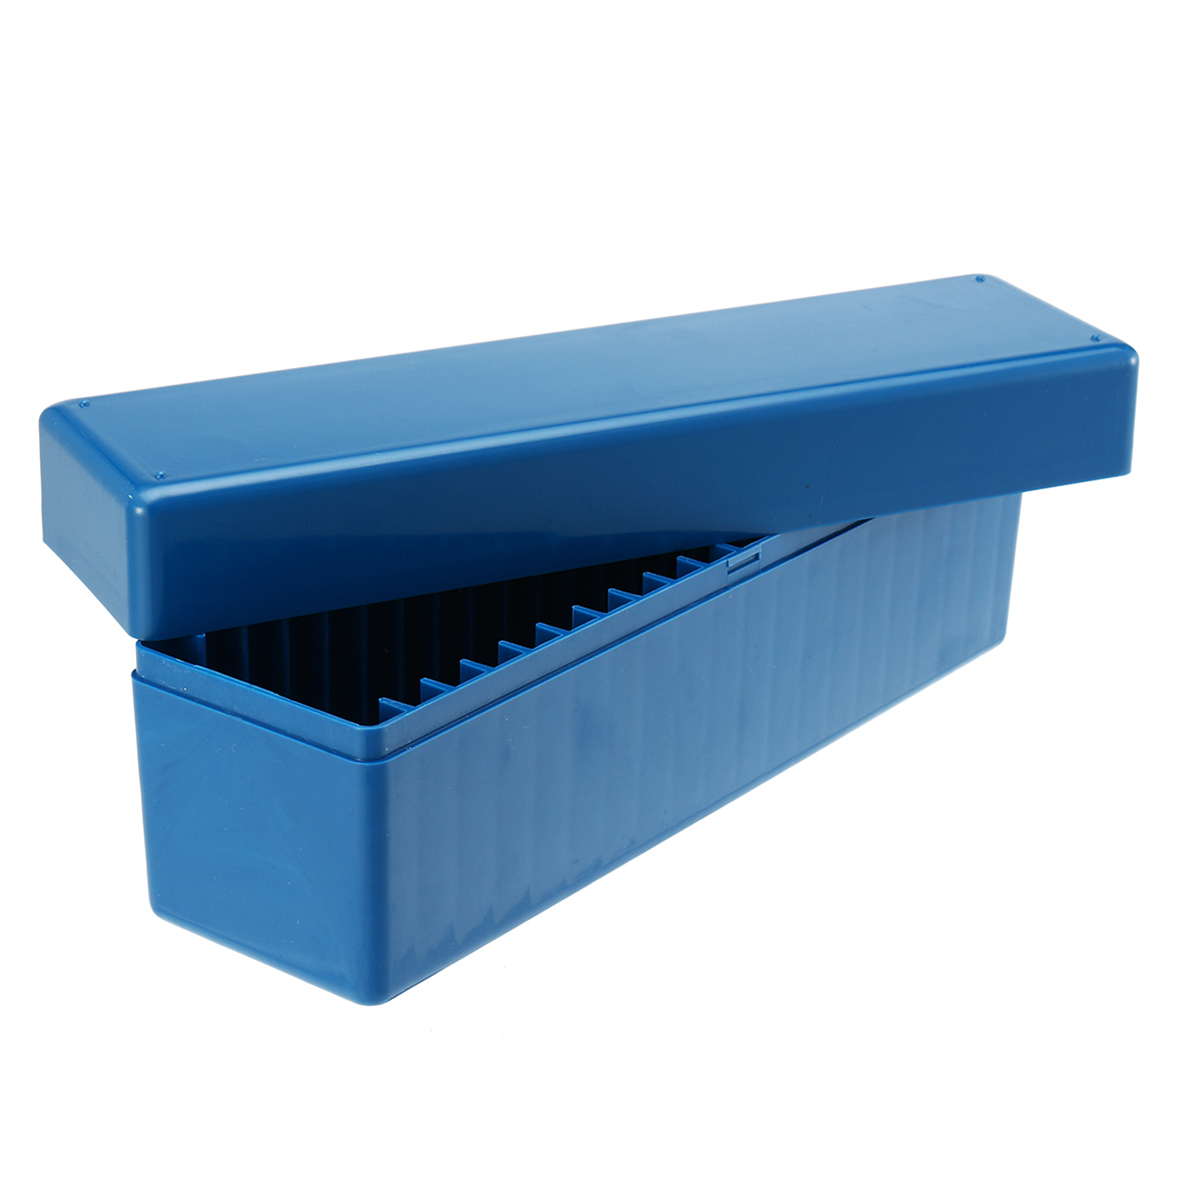 25x9x7cm-Blue-Storage-Tool-Box-Case-Holds-20-Individual-Certified-PCGS-NGC-ICG-Coin-Holders-1425243-2